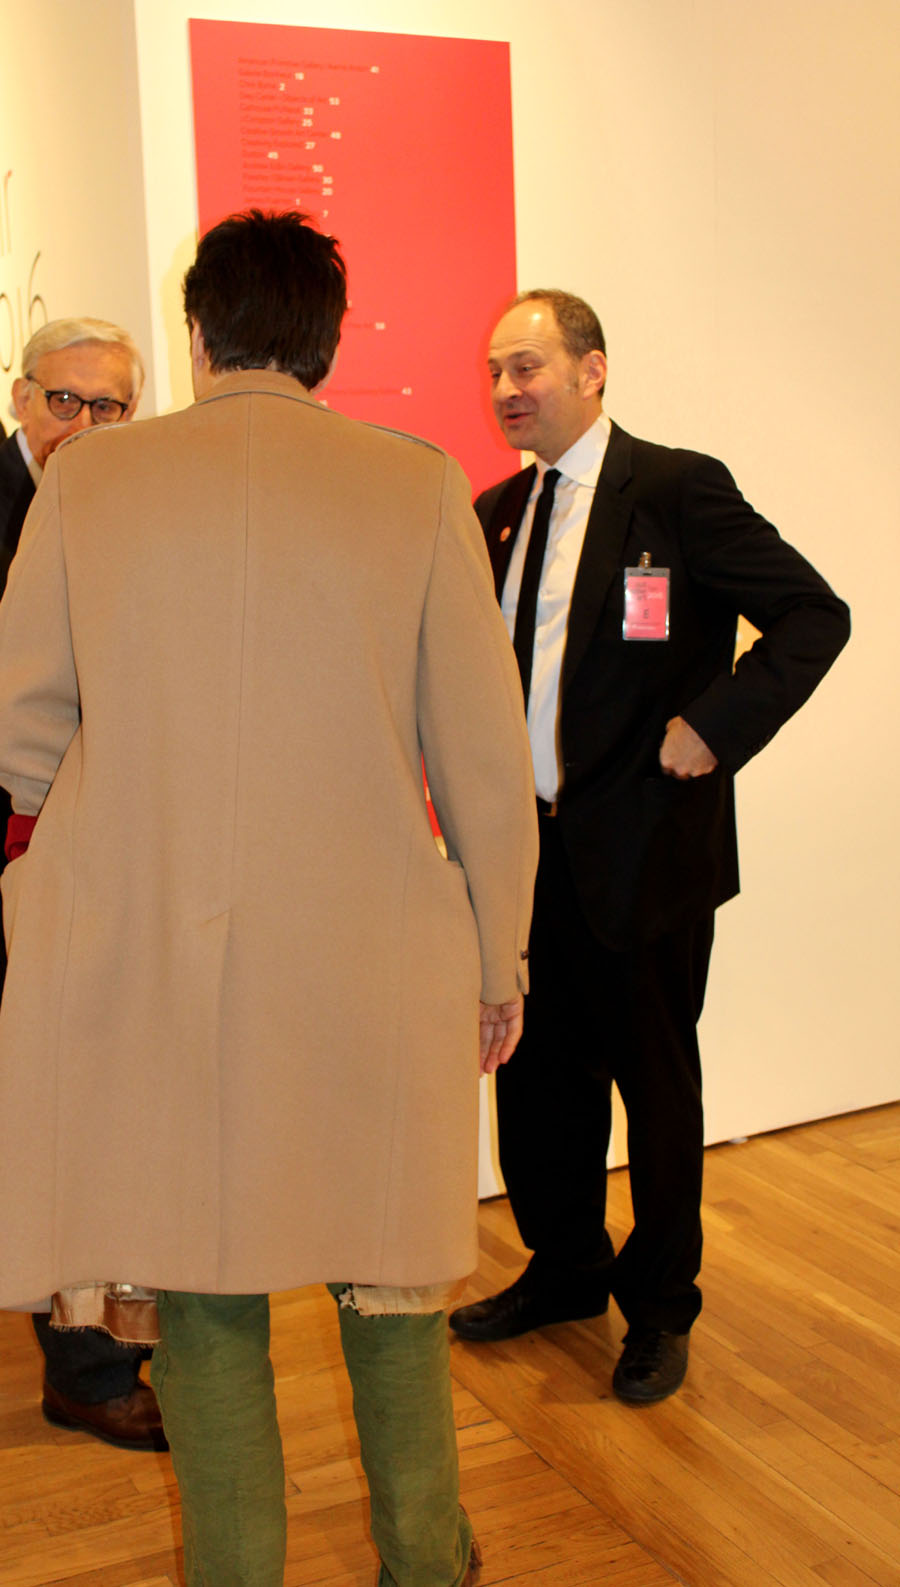 Andrew Edlin, chief executive officer of Wide Open Arts and gallerist,<br>conferring with show visitors.